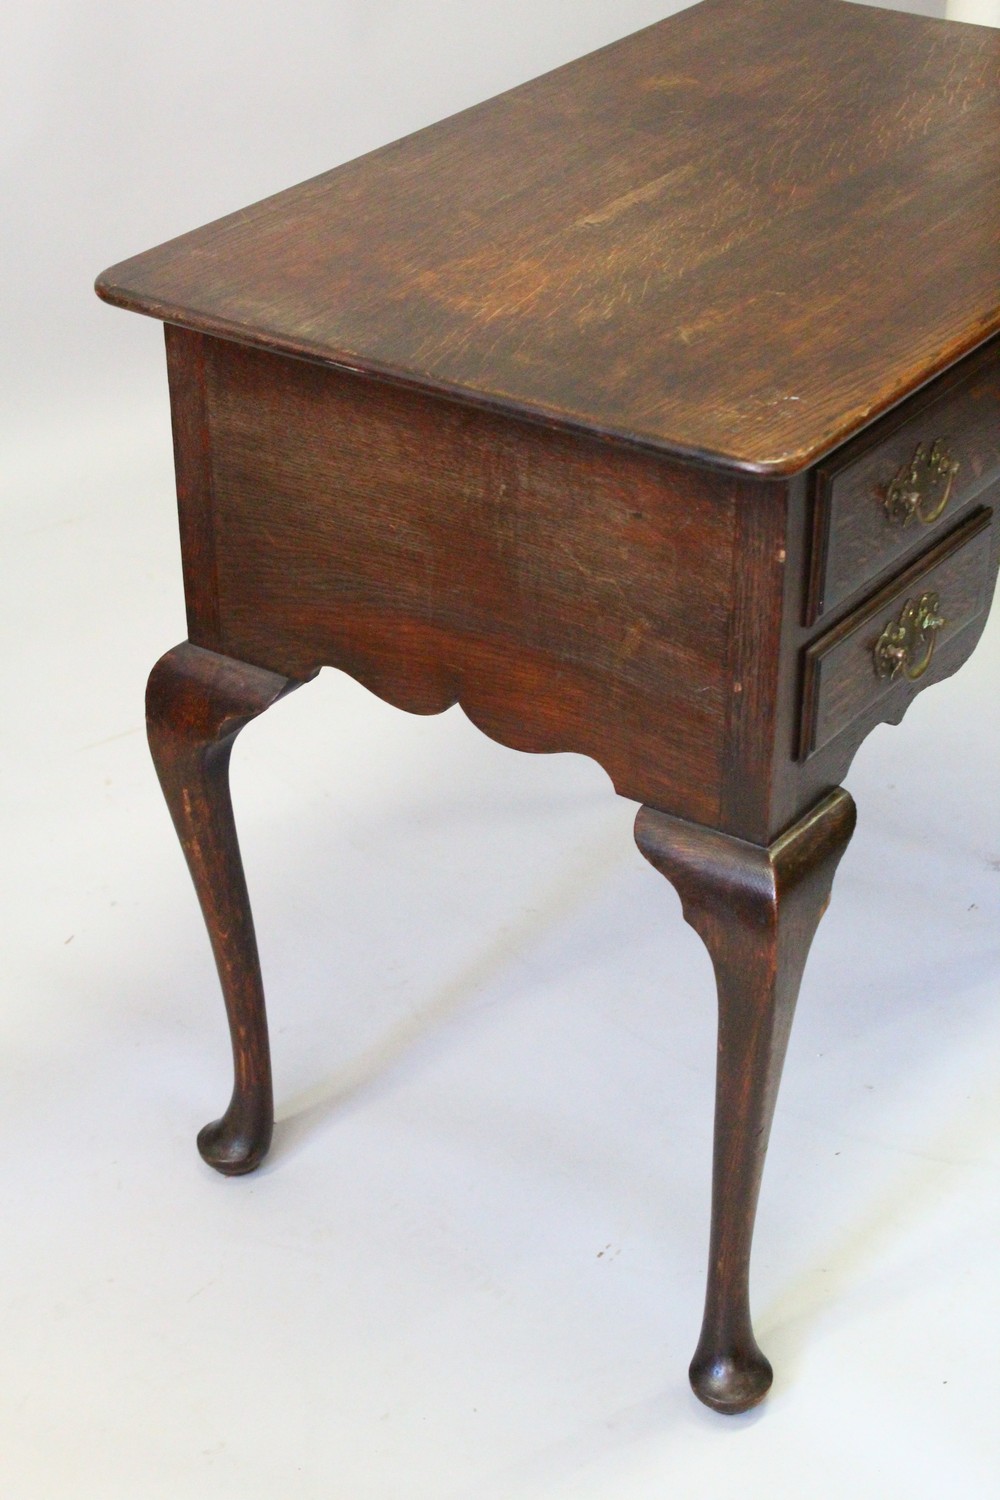 AN 18TH CENTURY STYLE OAK LOWBOY, EARLY 20TH CENTURY, with one long drawer and two short drawers, on - Image 3 of 8